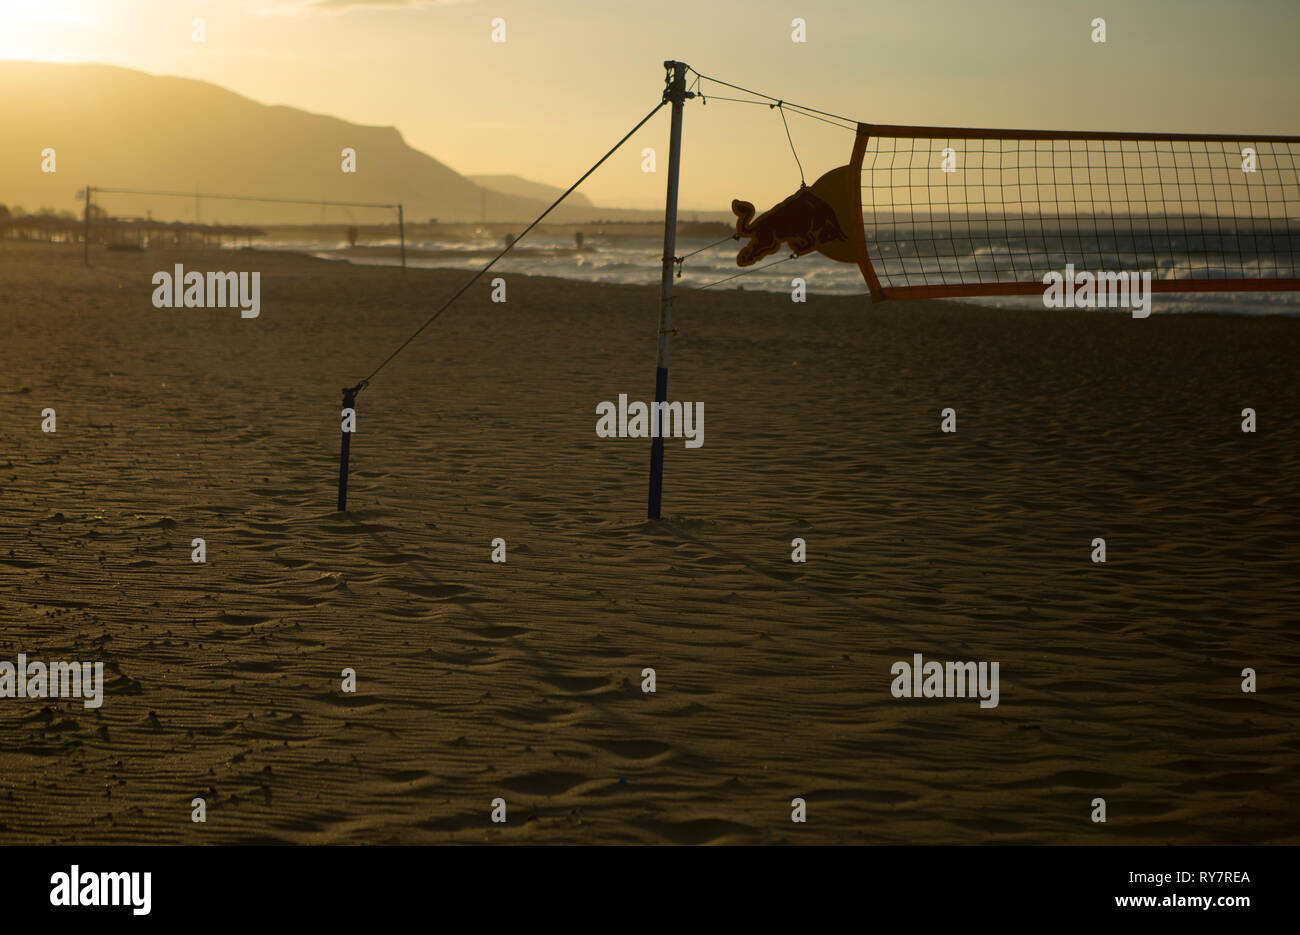 Volleyball net at a beach Stock Photo